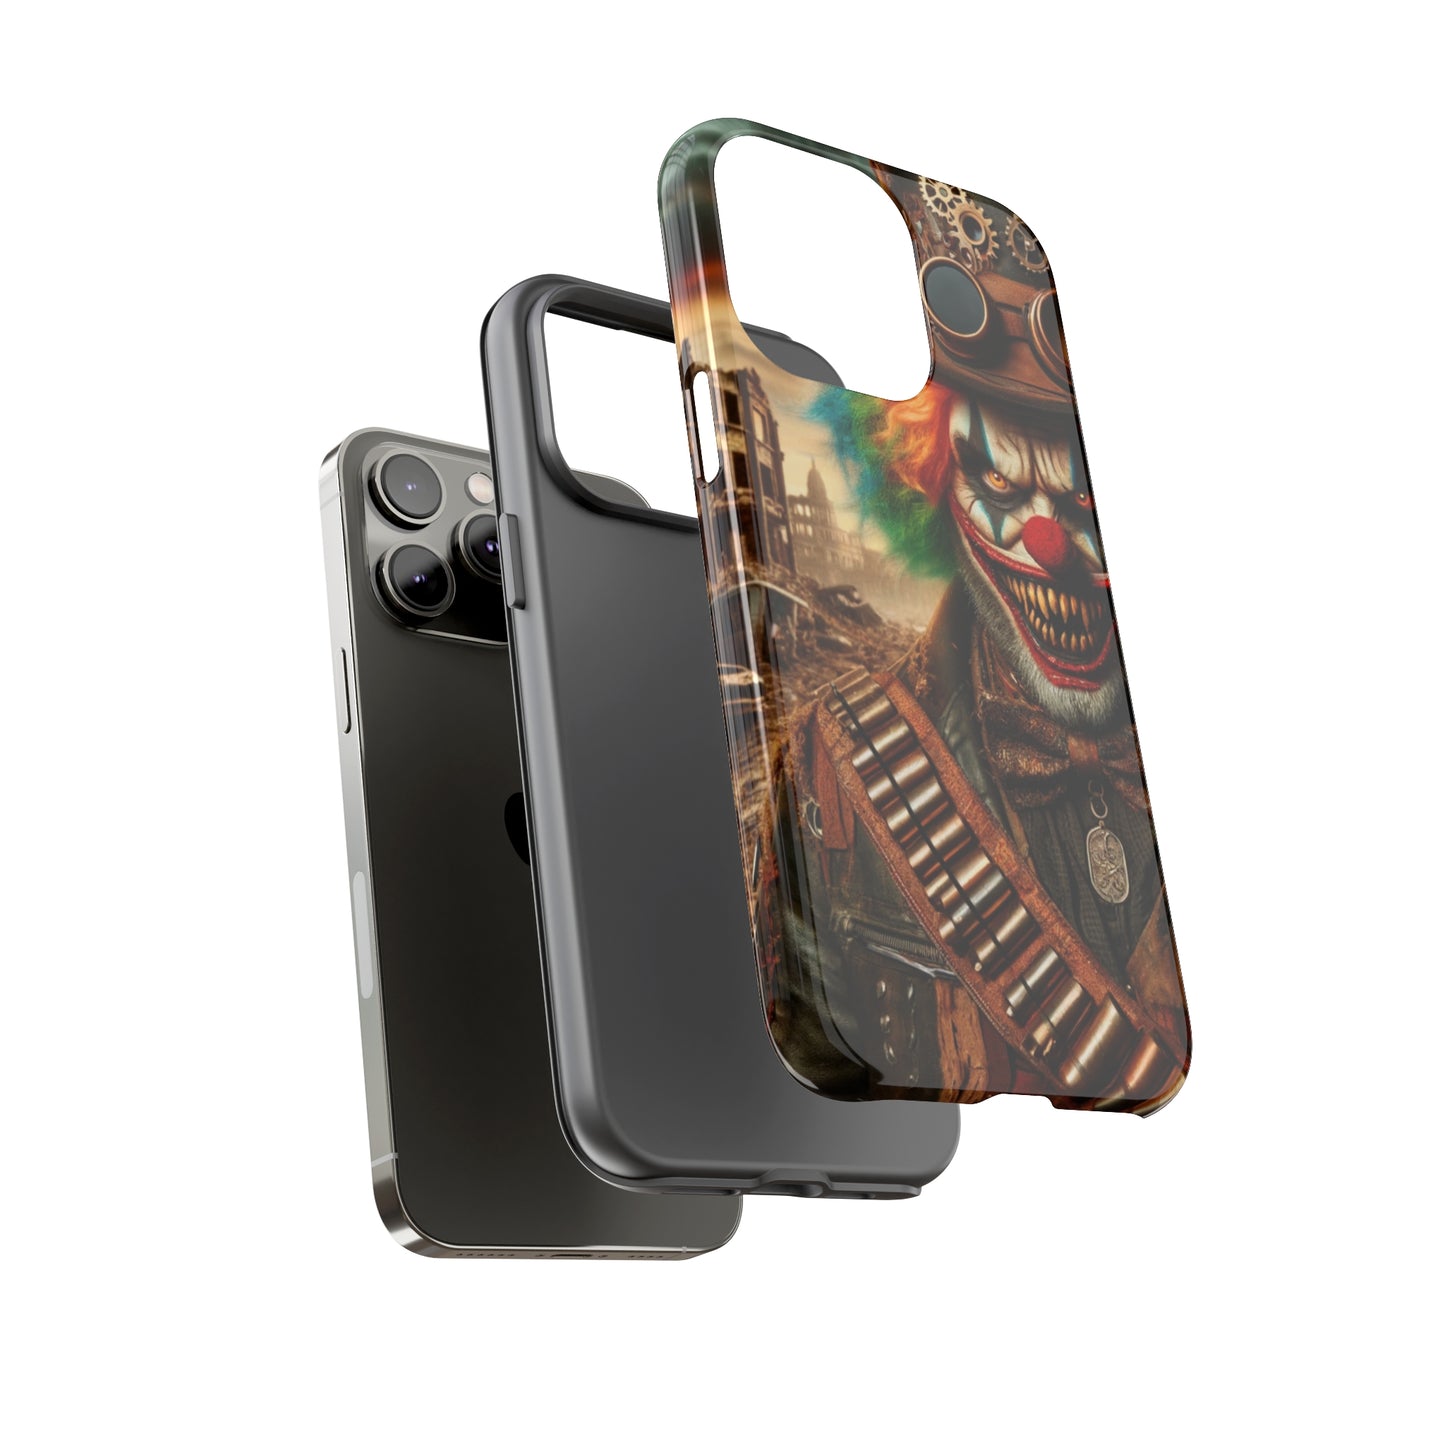 Carnival of Rust - Cell Phone Case